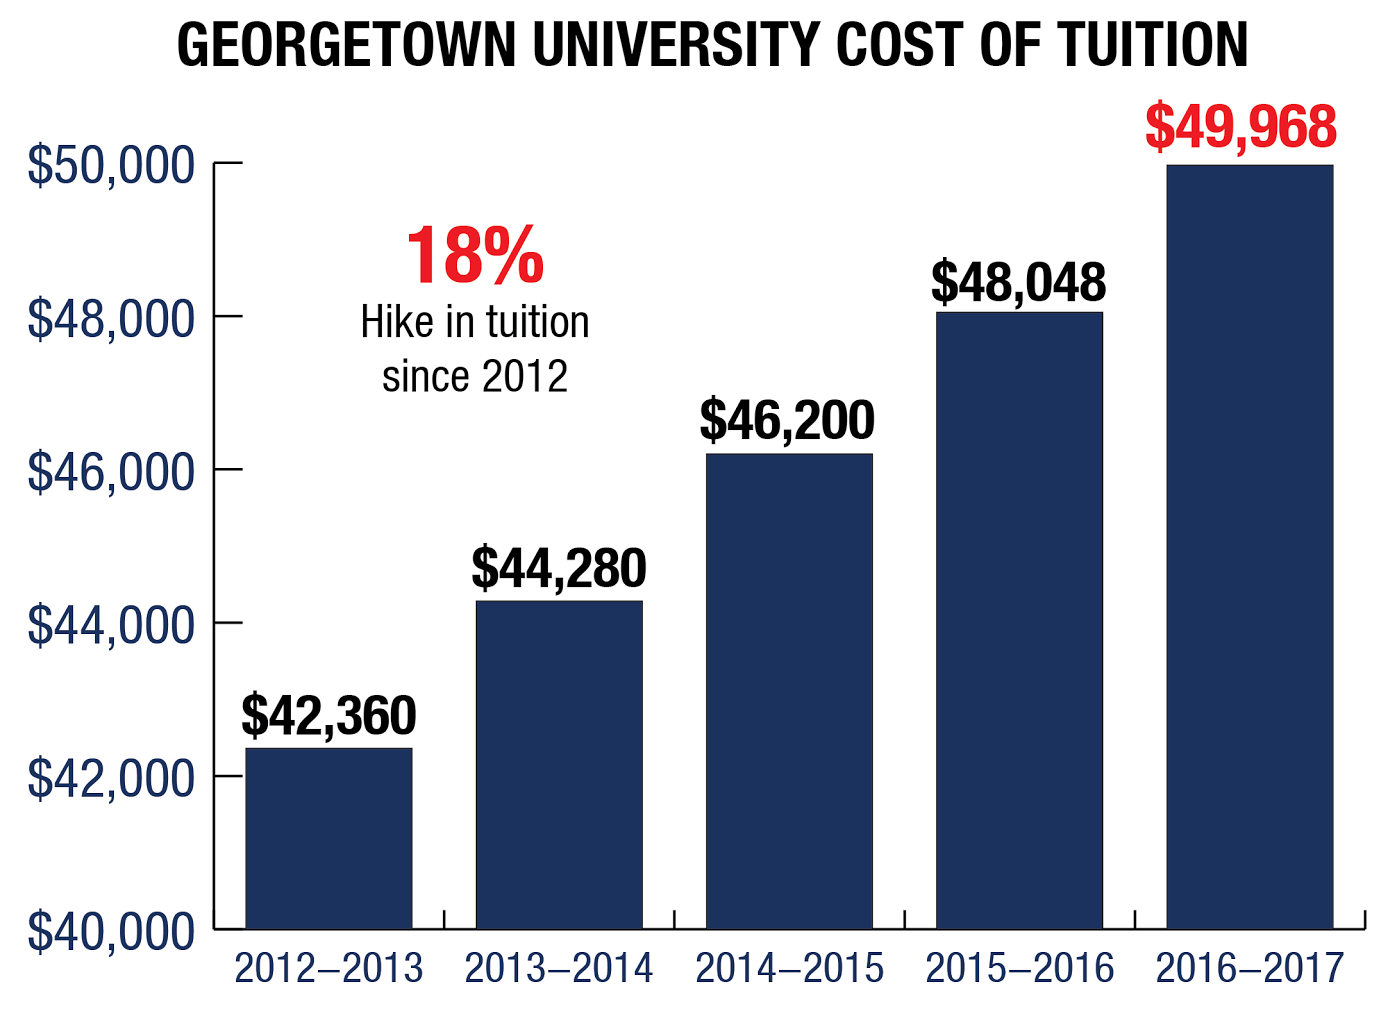 ILLUSTRATION BY JESUS RODRIGUEZ/THE HOYA Tuition will rise four percent beginning this fall semester from $48,048 to $49,968, contributing to a 18 percent hike in tuition since 2012. 